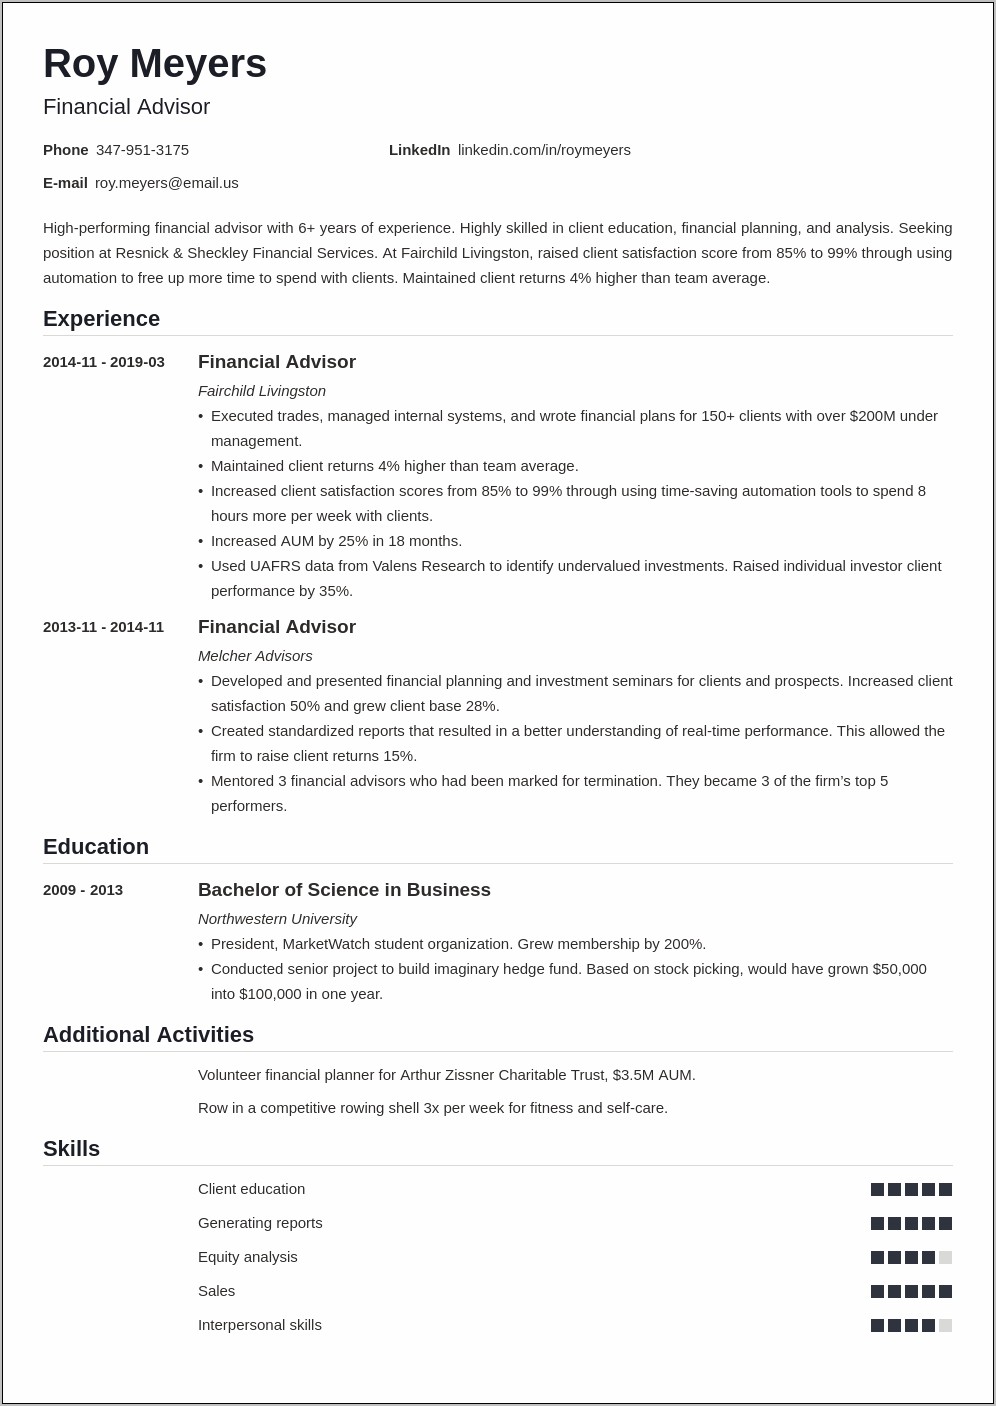 Resume Example For A Financial Advisor Objective